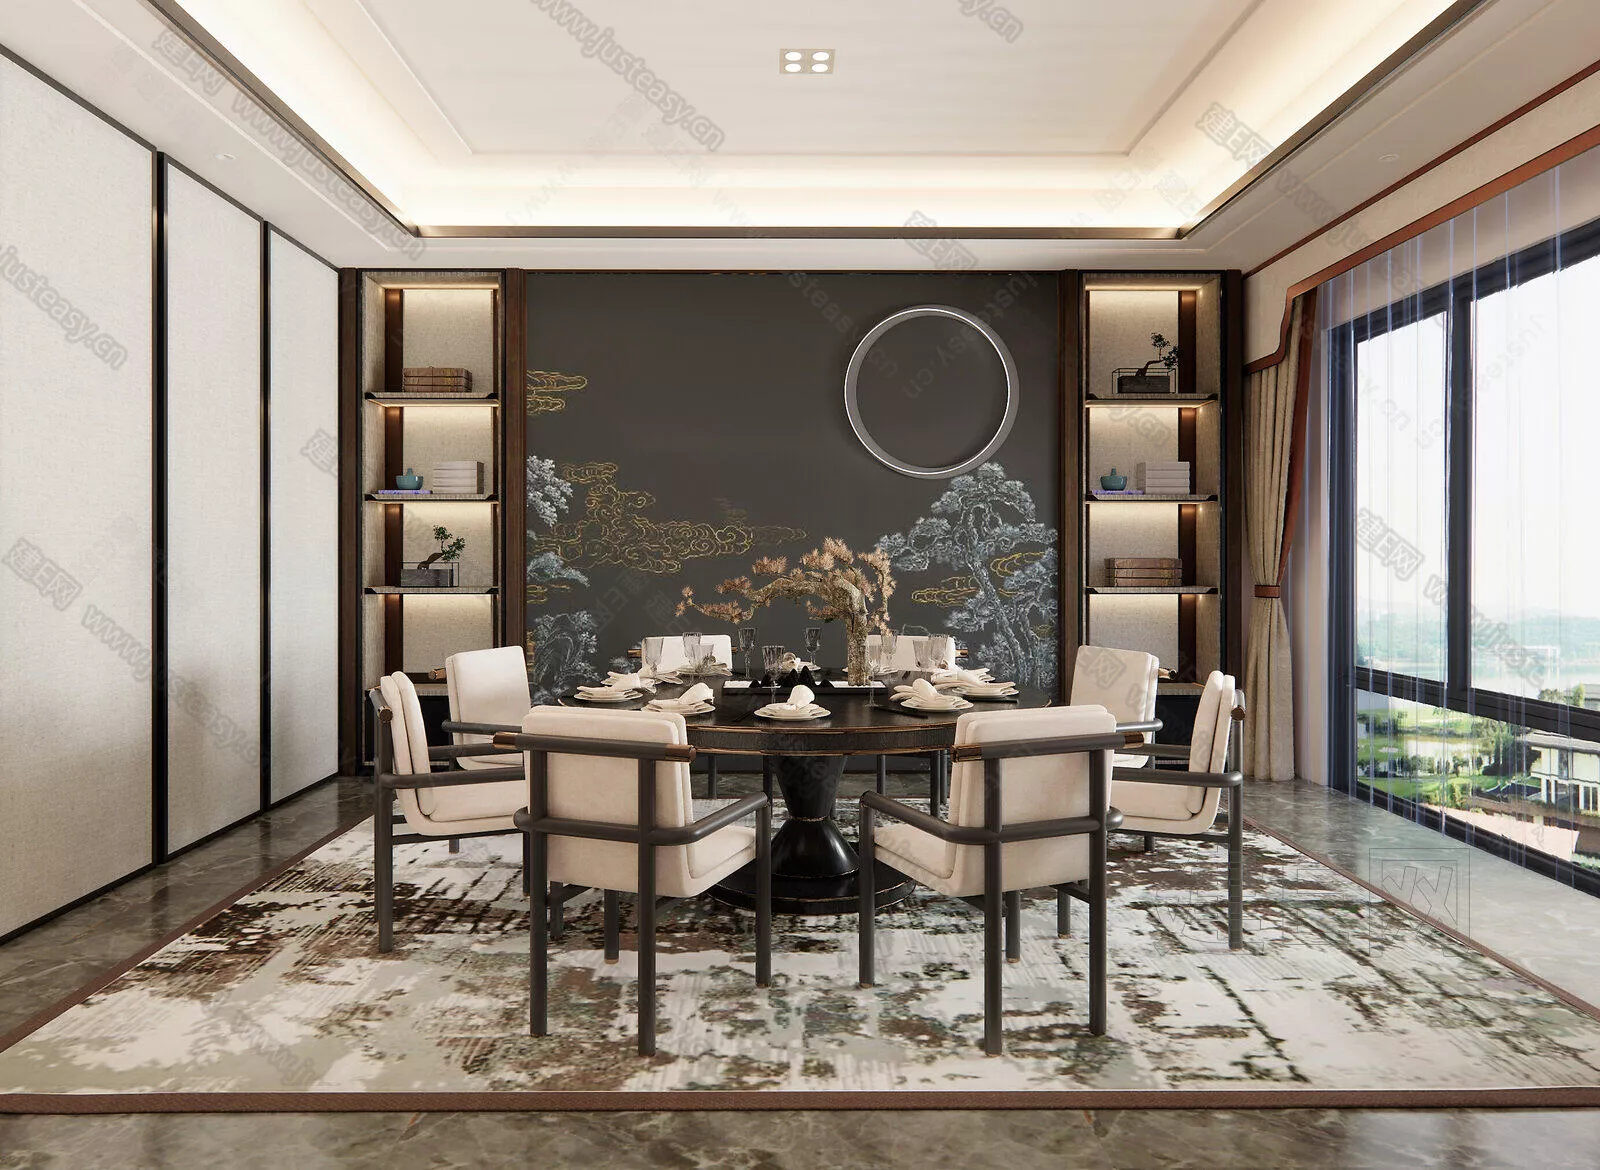 CHINESE DINING ROOM - SKETCHUP 3D SCENE - ENSCAPE - 100682119